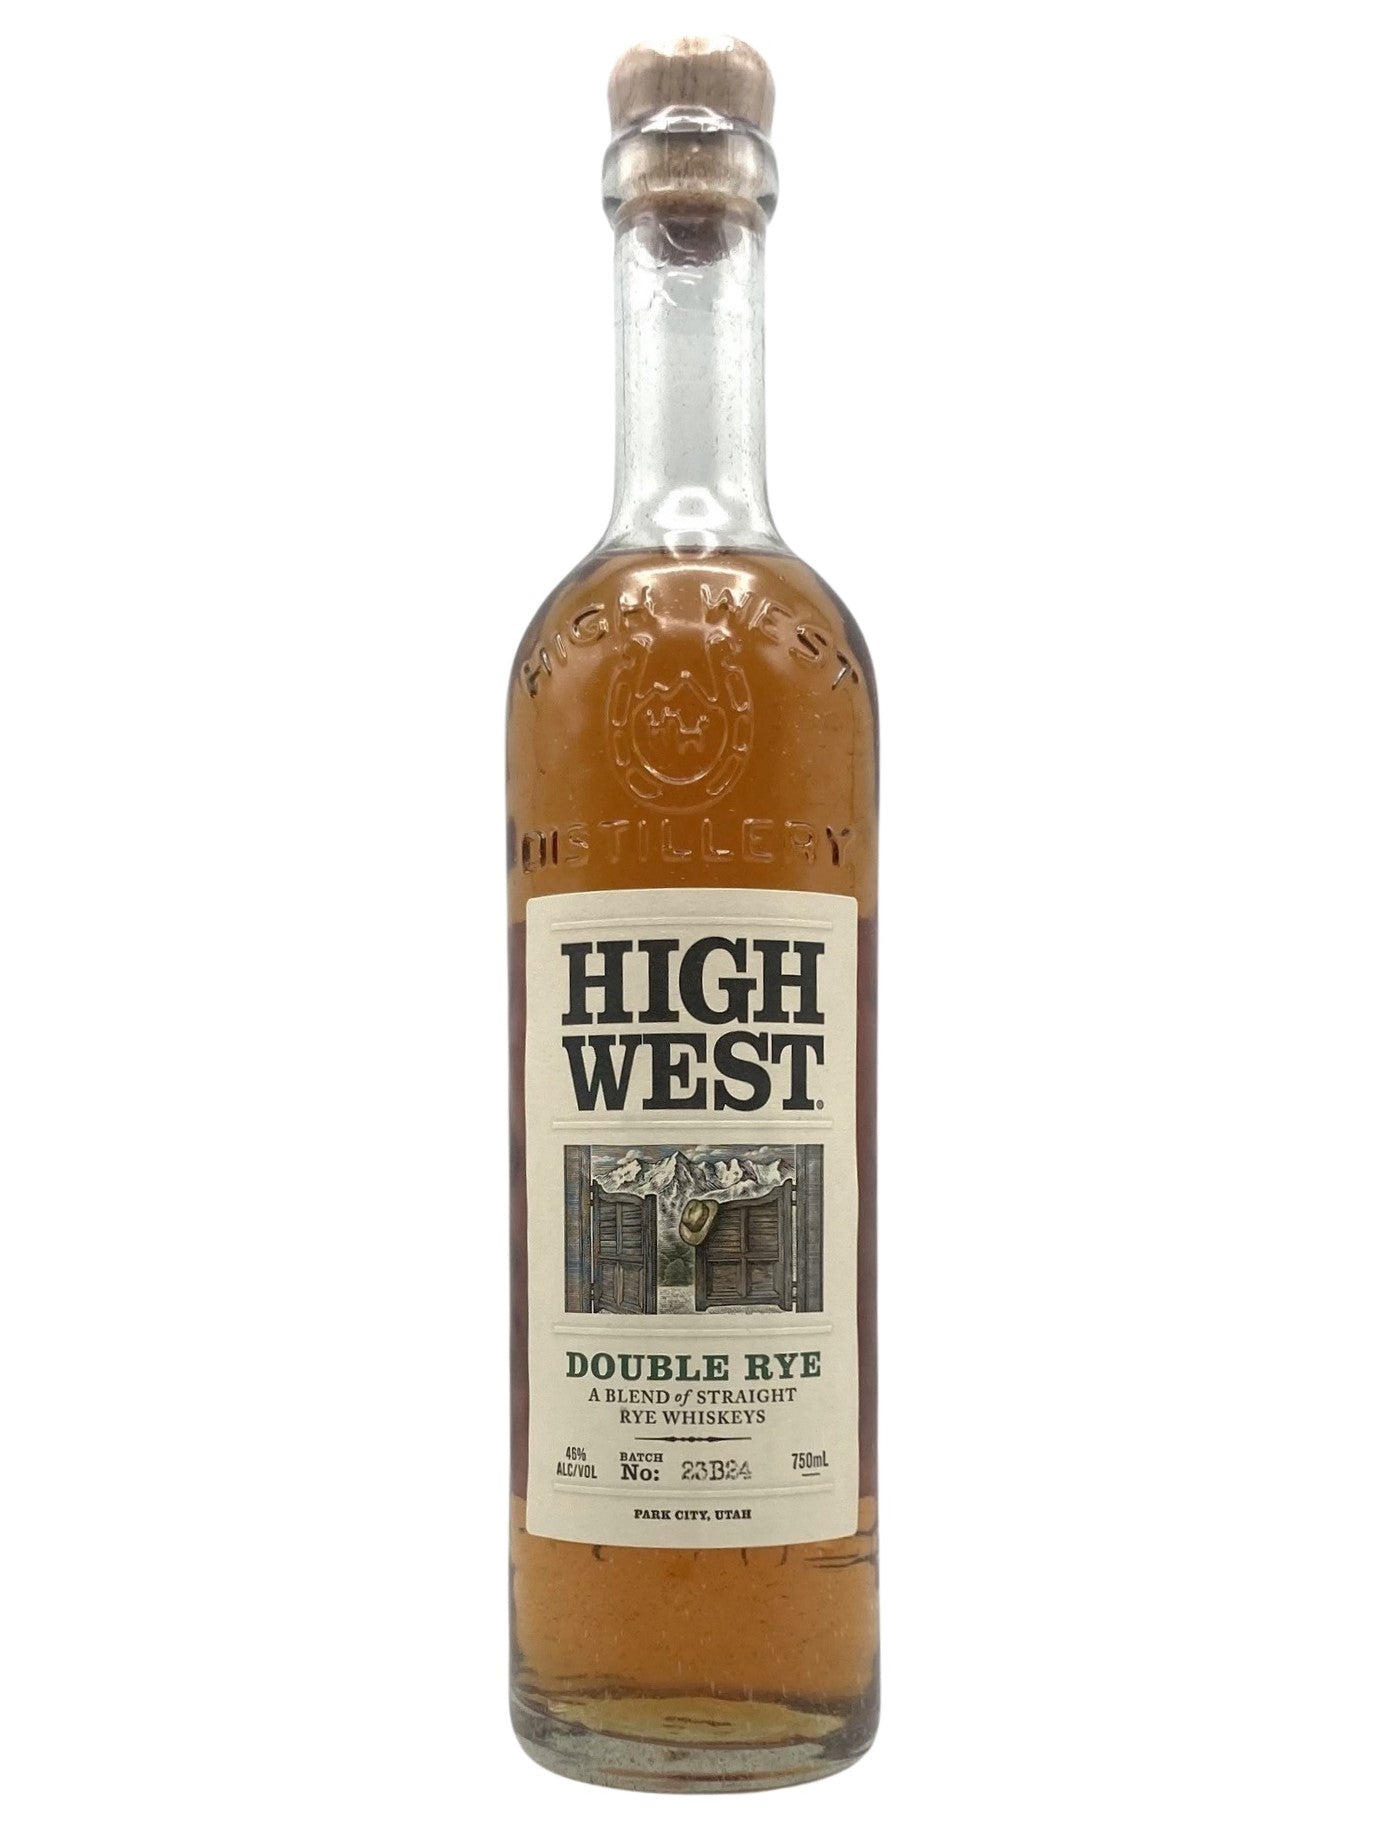 High West Double Rye Whisky